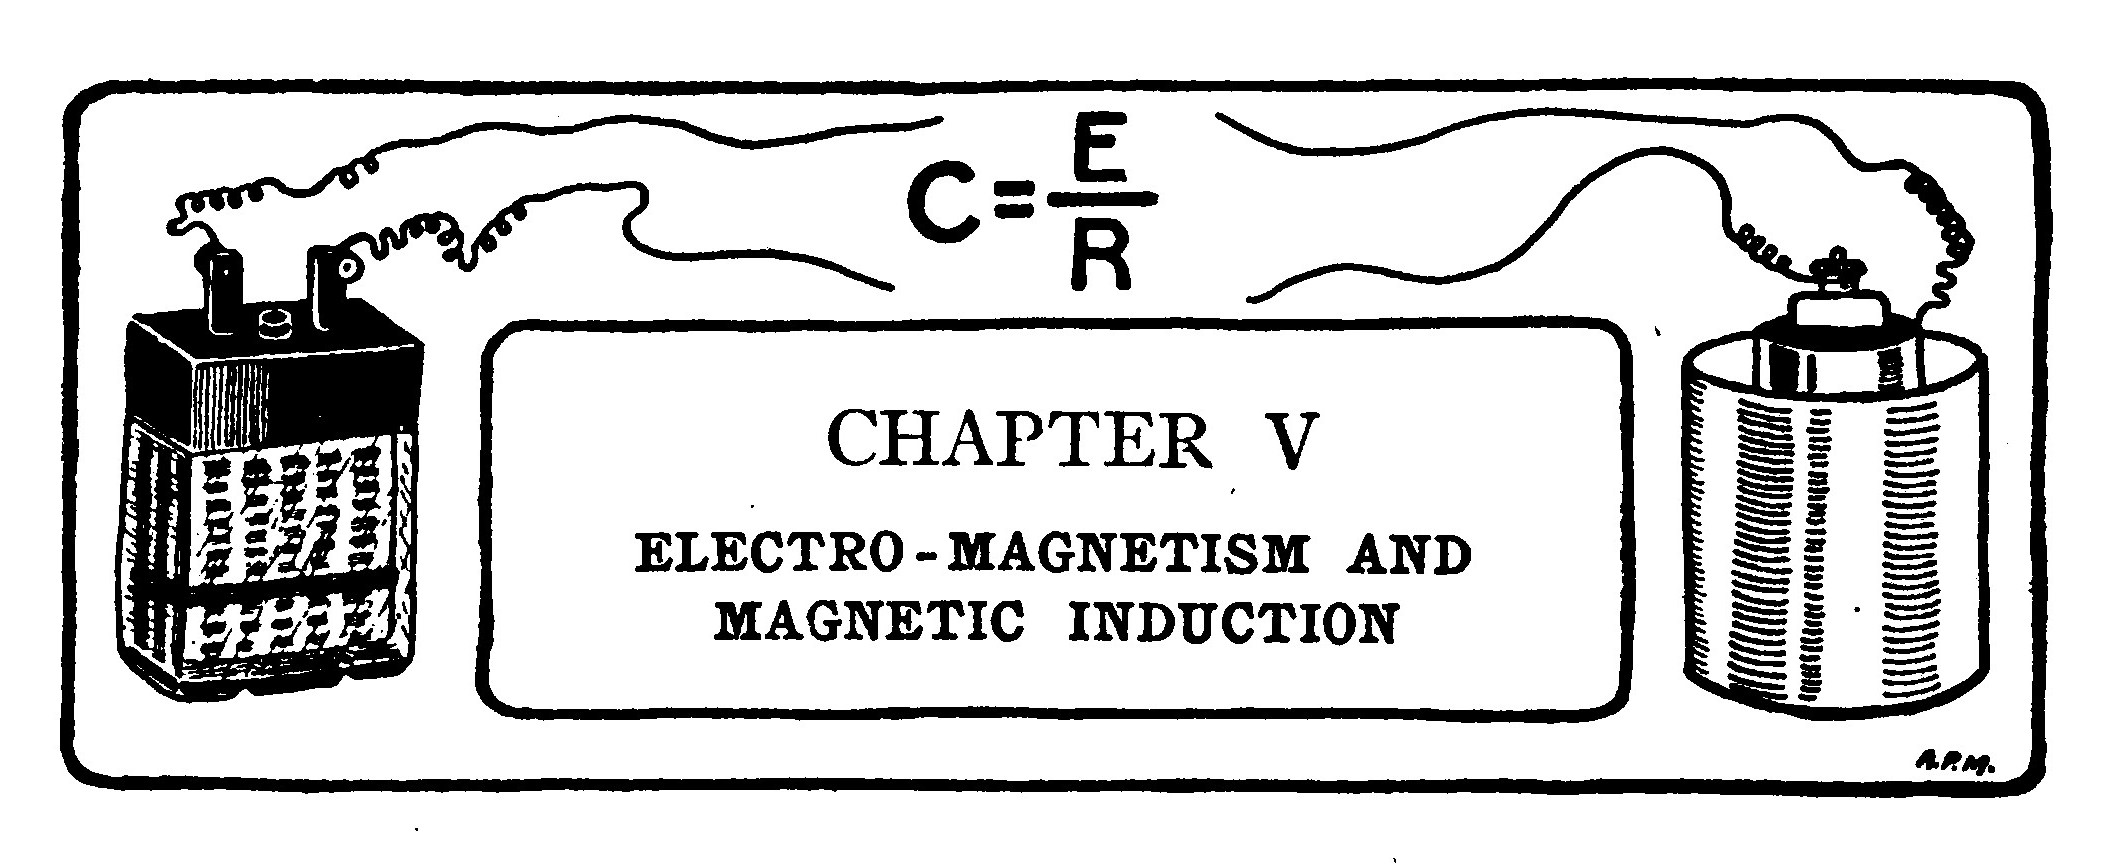 ELECTRO-MAGNETISM AND MAGNETIC INDUCTION